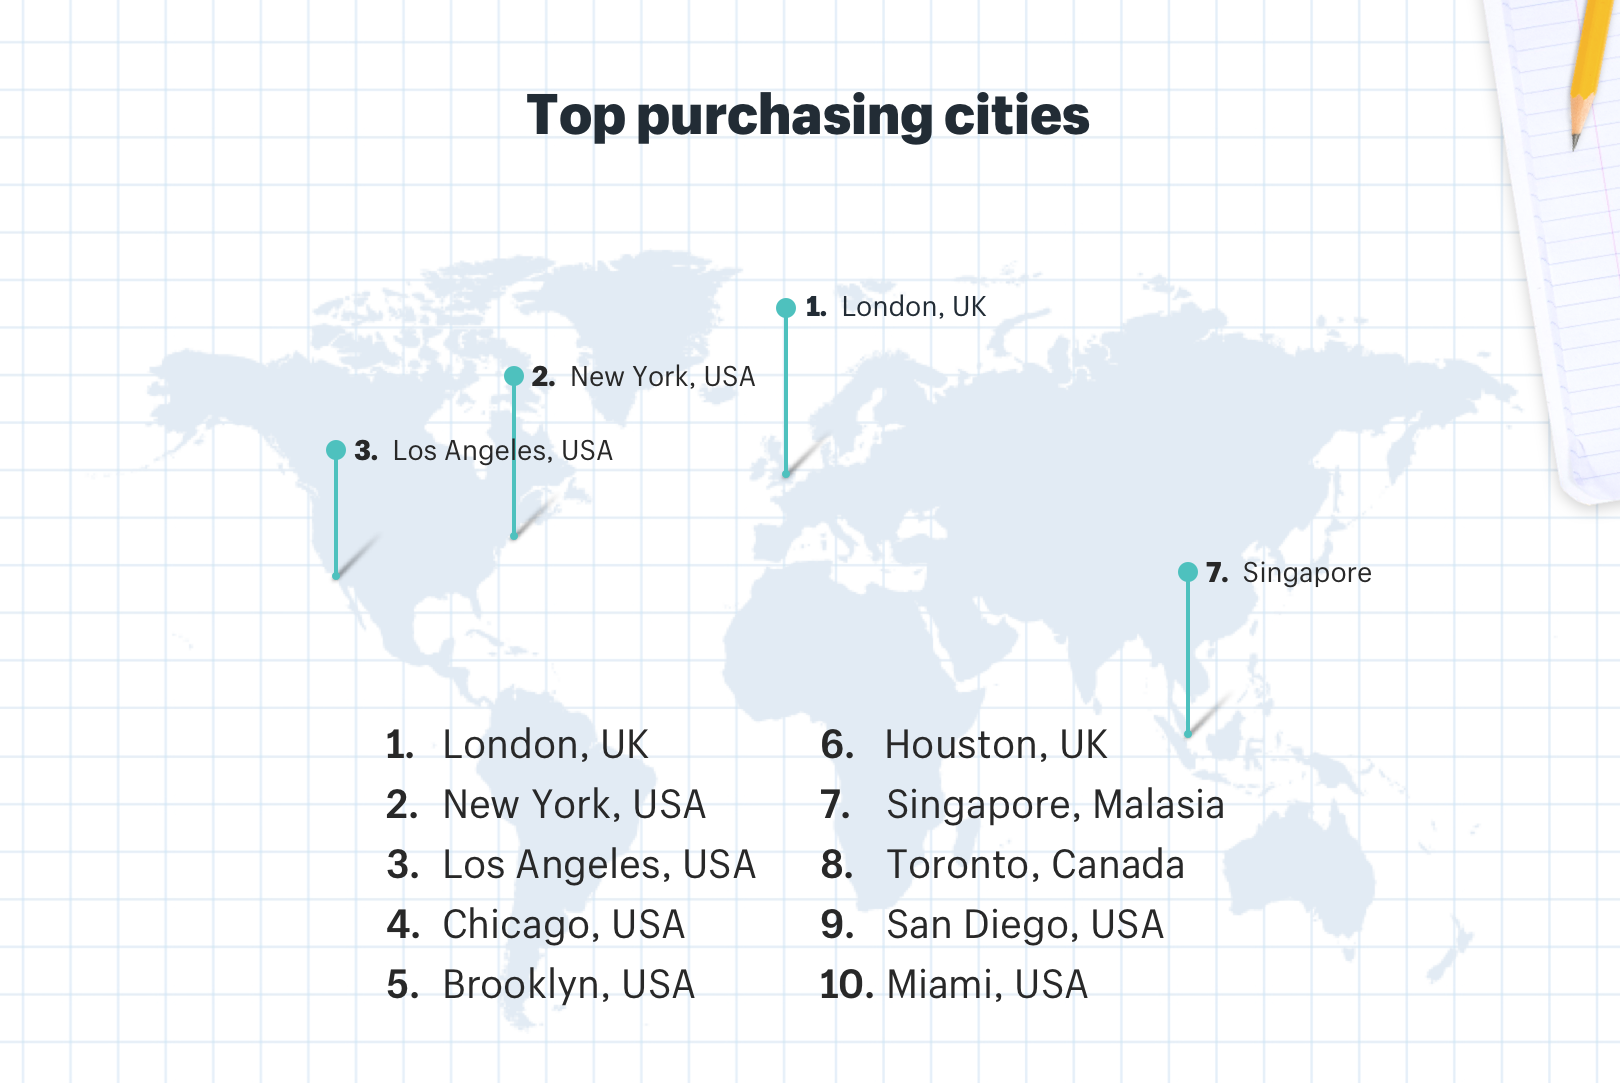 Back to school ecommerce international top purchasing cities